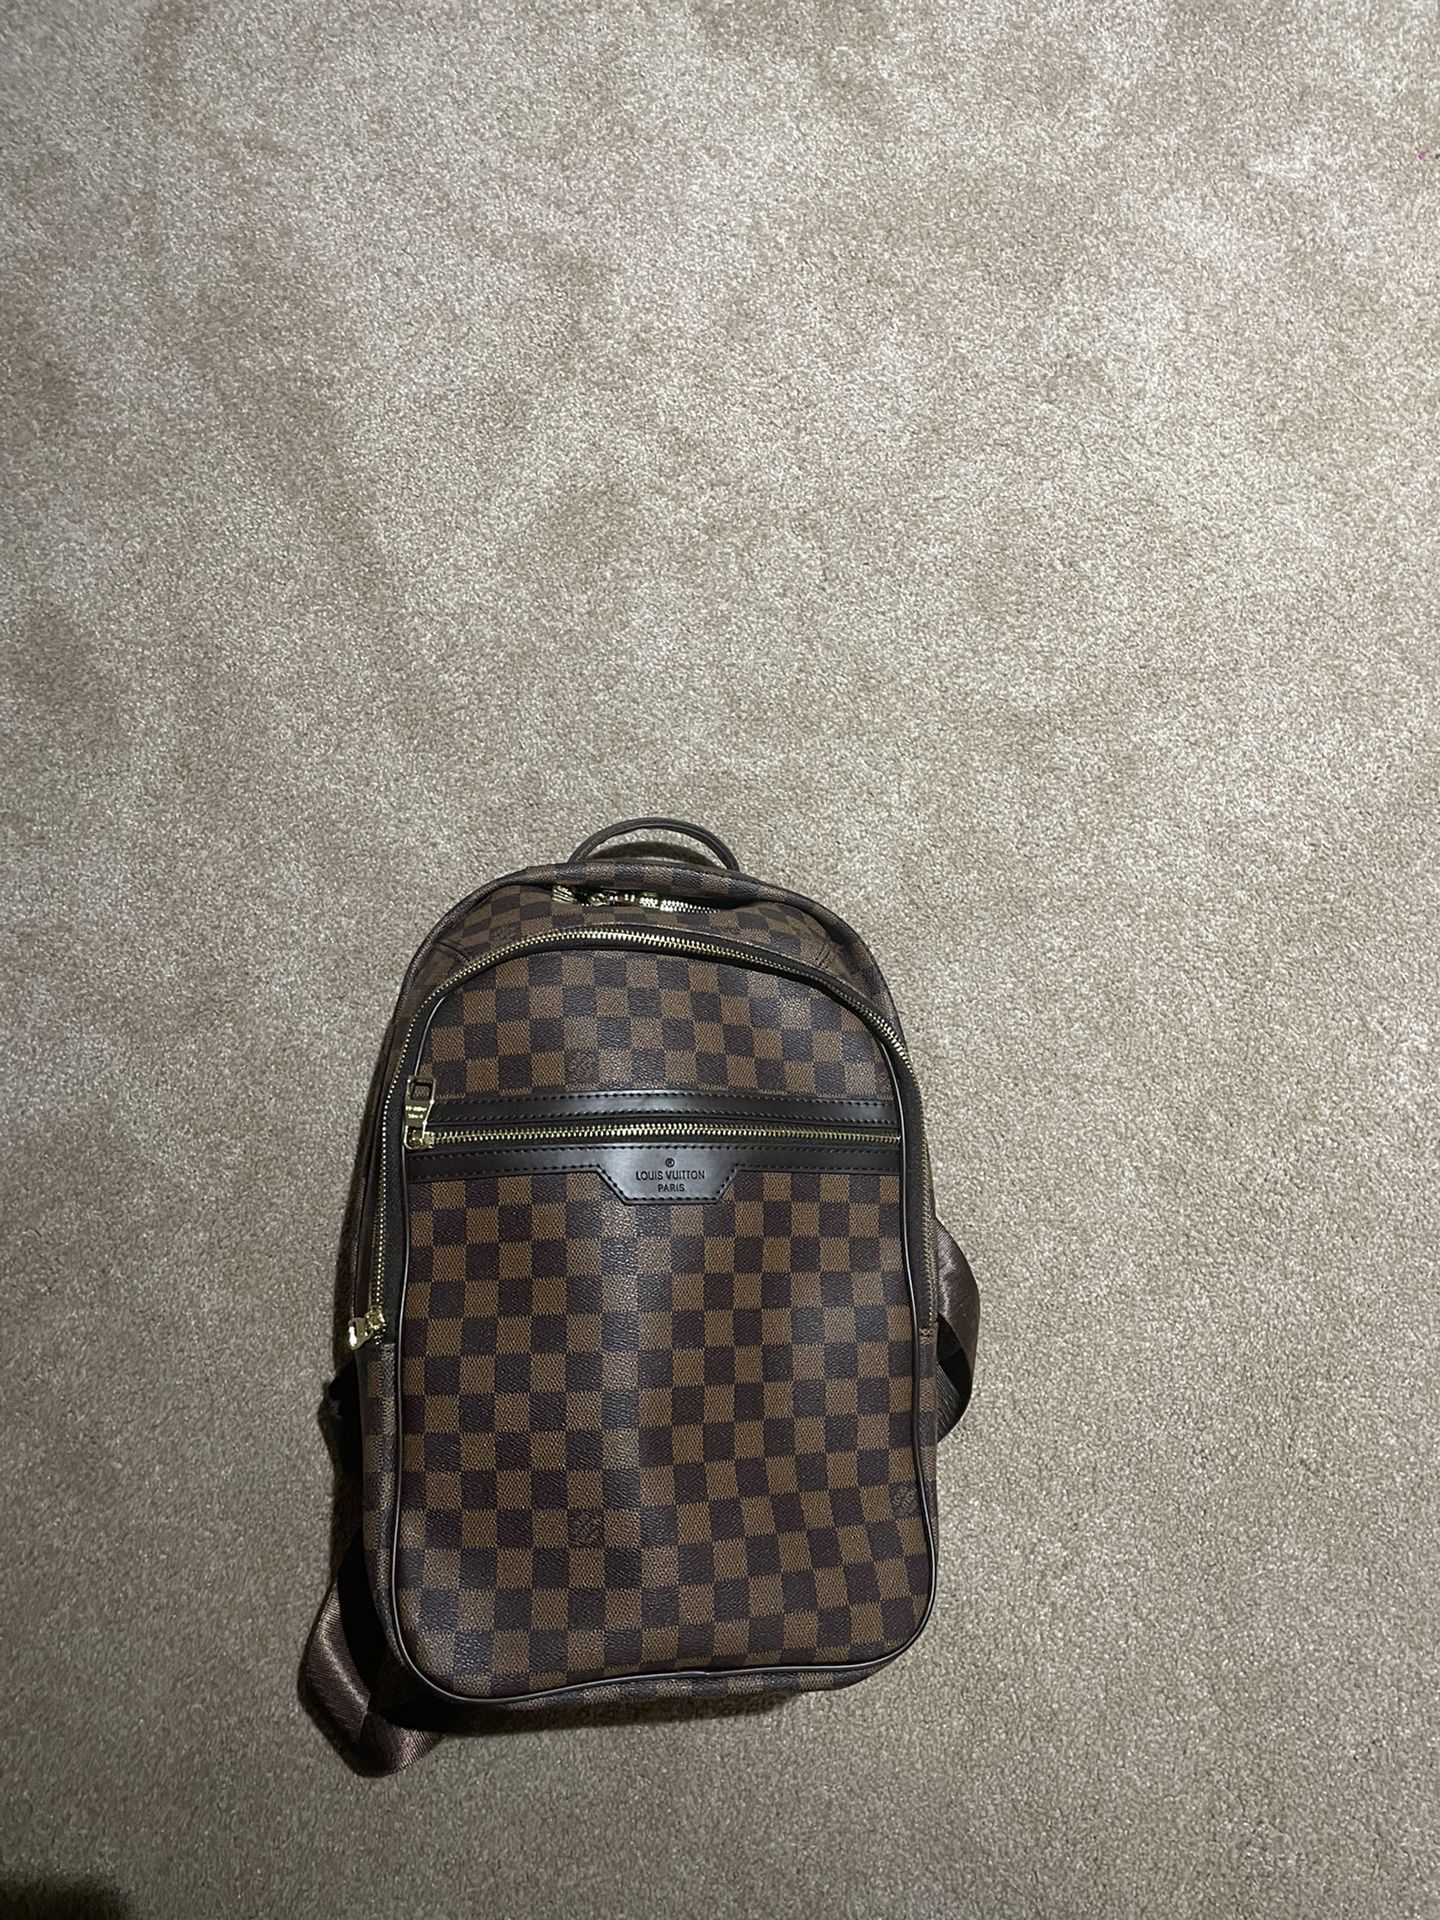 LOUIS VUITTON LV X NBA BROWN BACKPACK for Sale in Orlando, FL - OfferUp